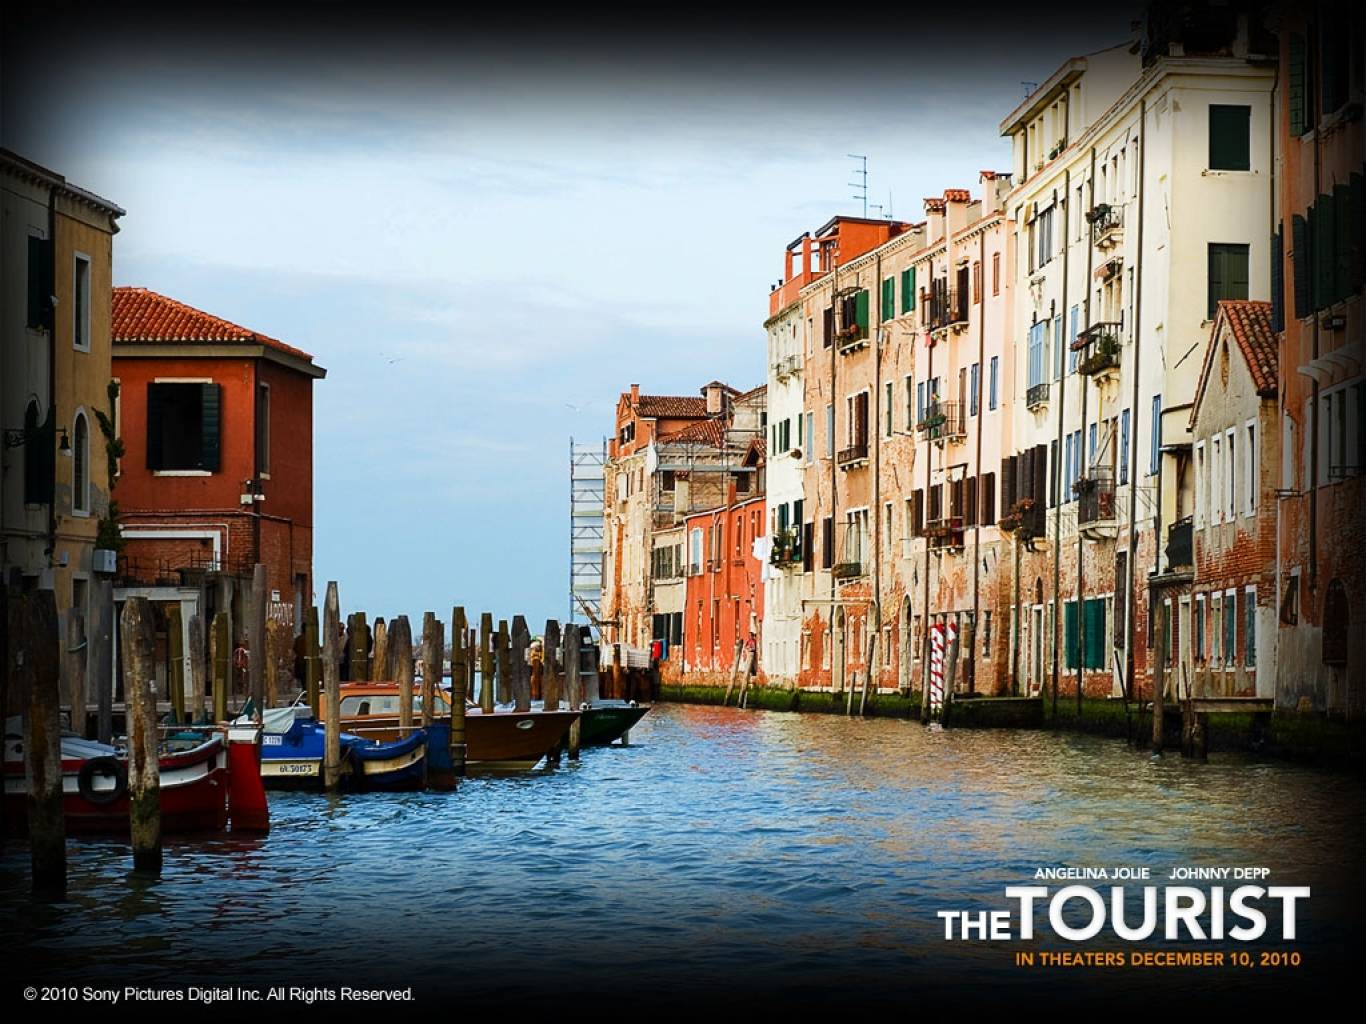 The Tourist Movie HD Wallpaper. The Tourist HD Movie Wallpaper Free Download (1080p to 2K)